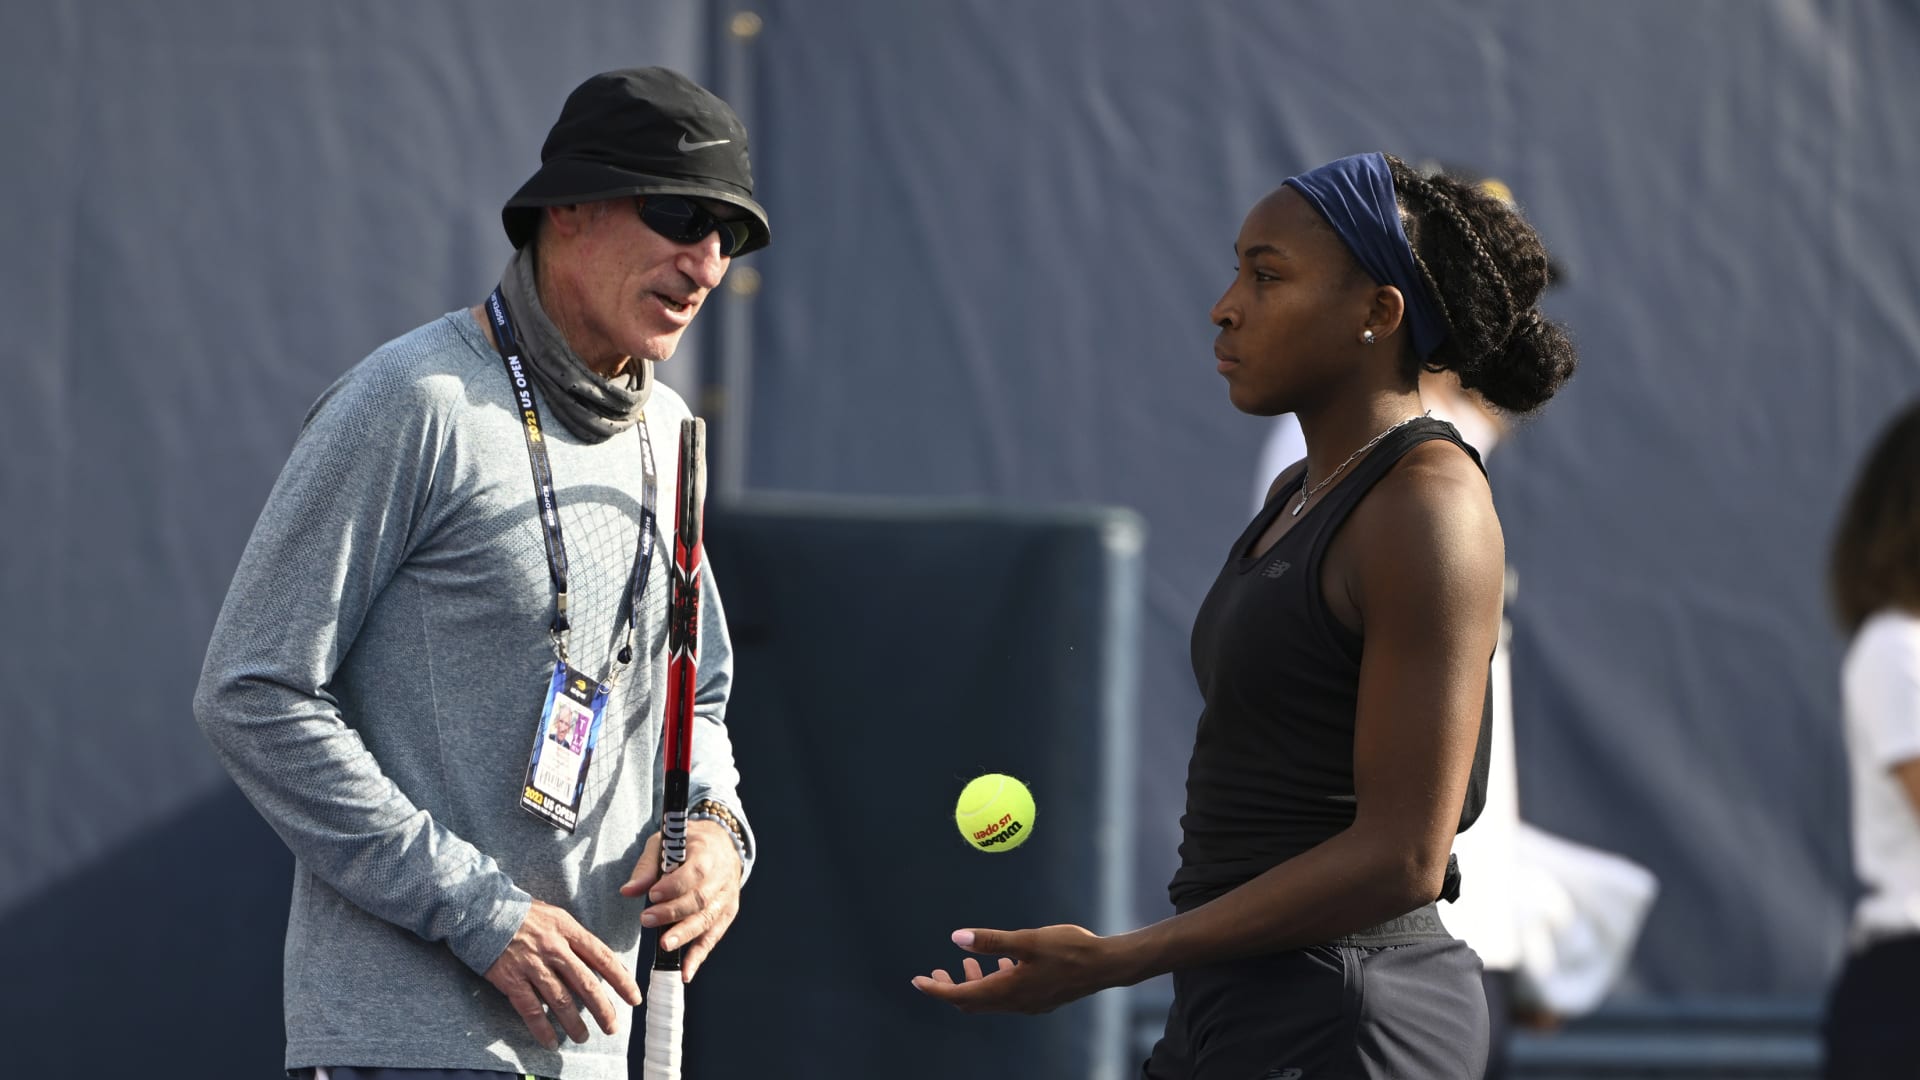 Coco Gauff and the quirks of Brad Gilbert: “He's been giving me